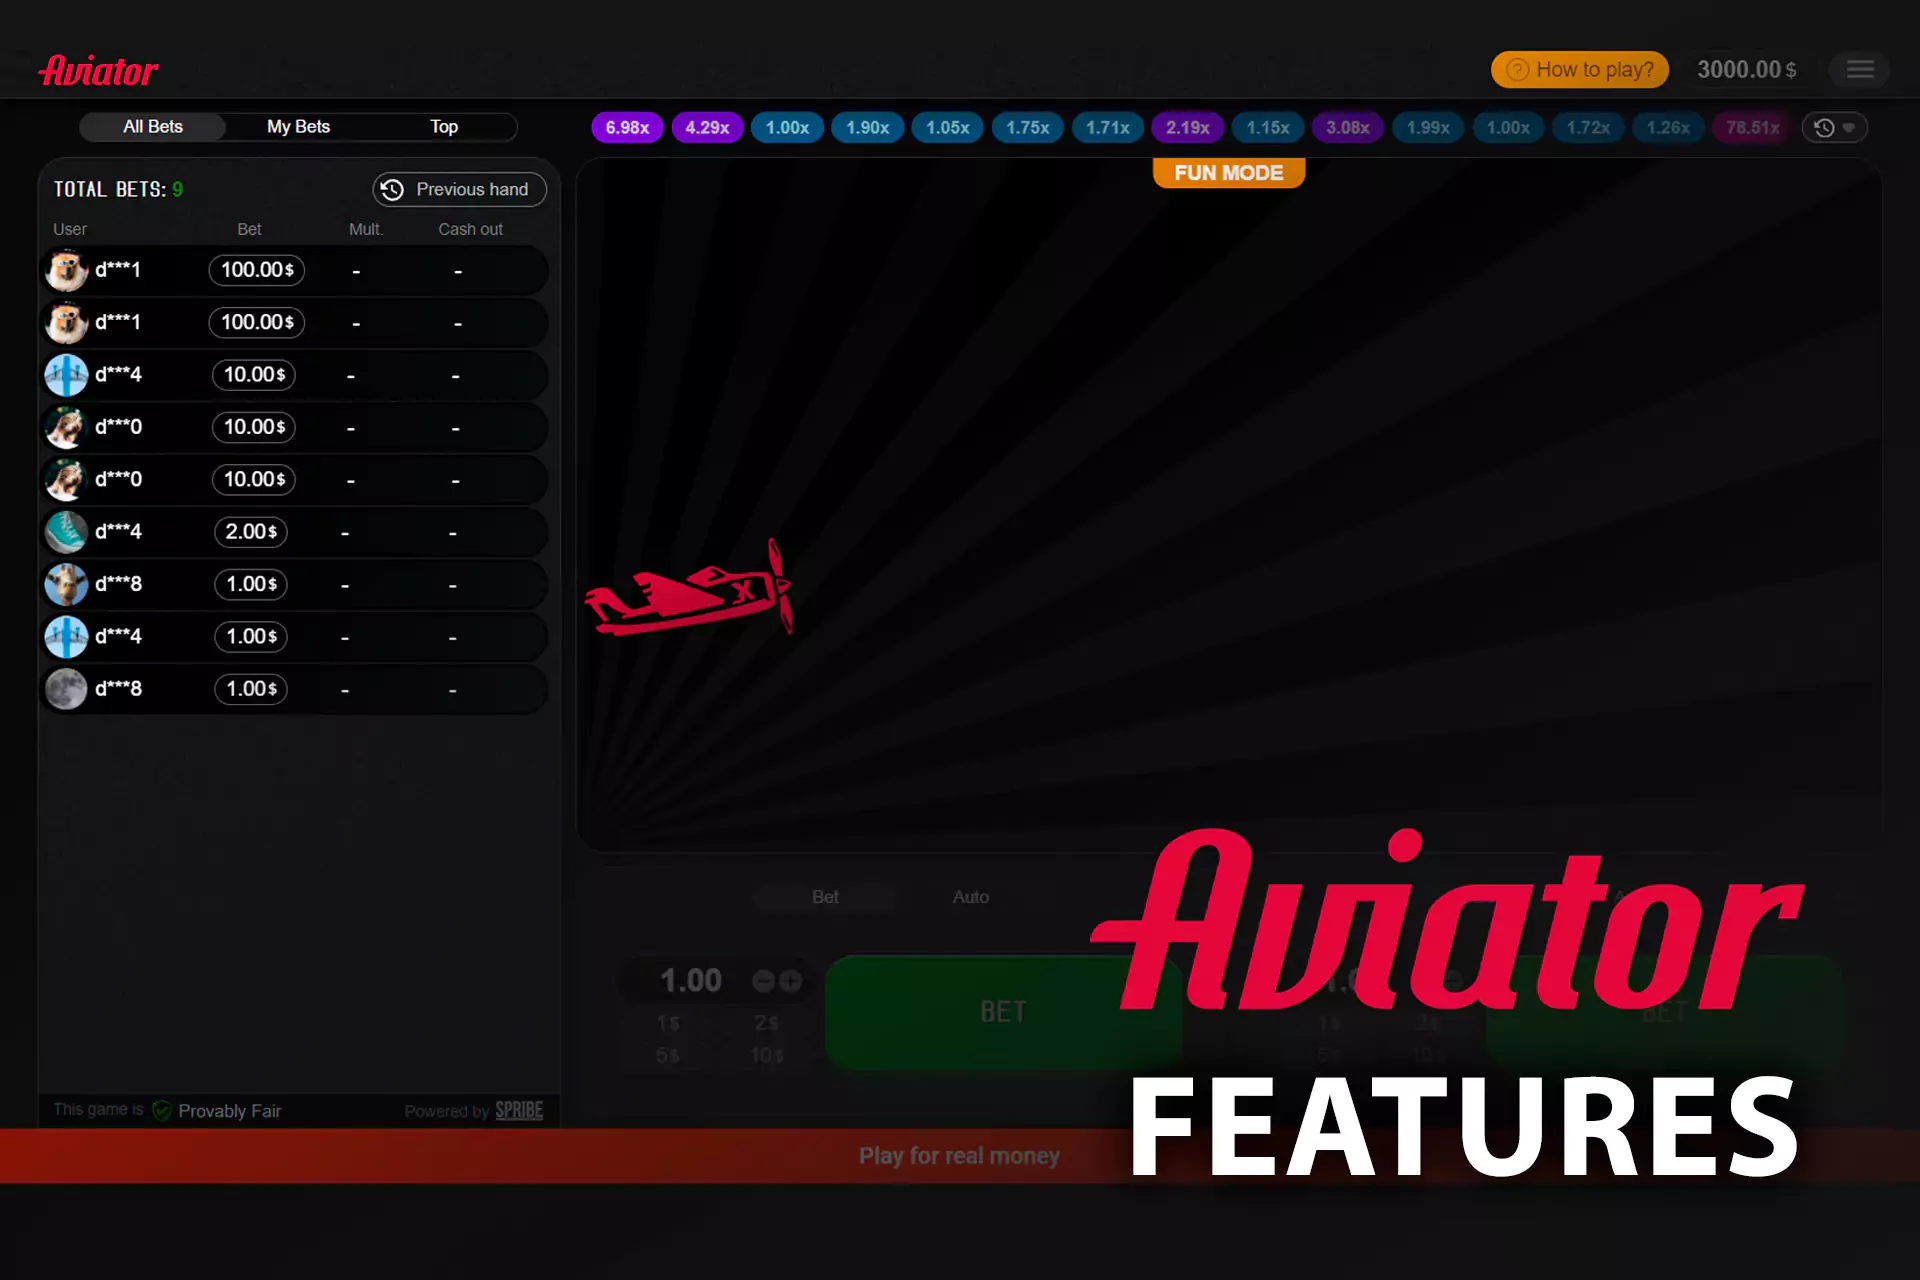 The Aviator is a slot machine by Scribe with a simple linear mechanic of a flying plane.